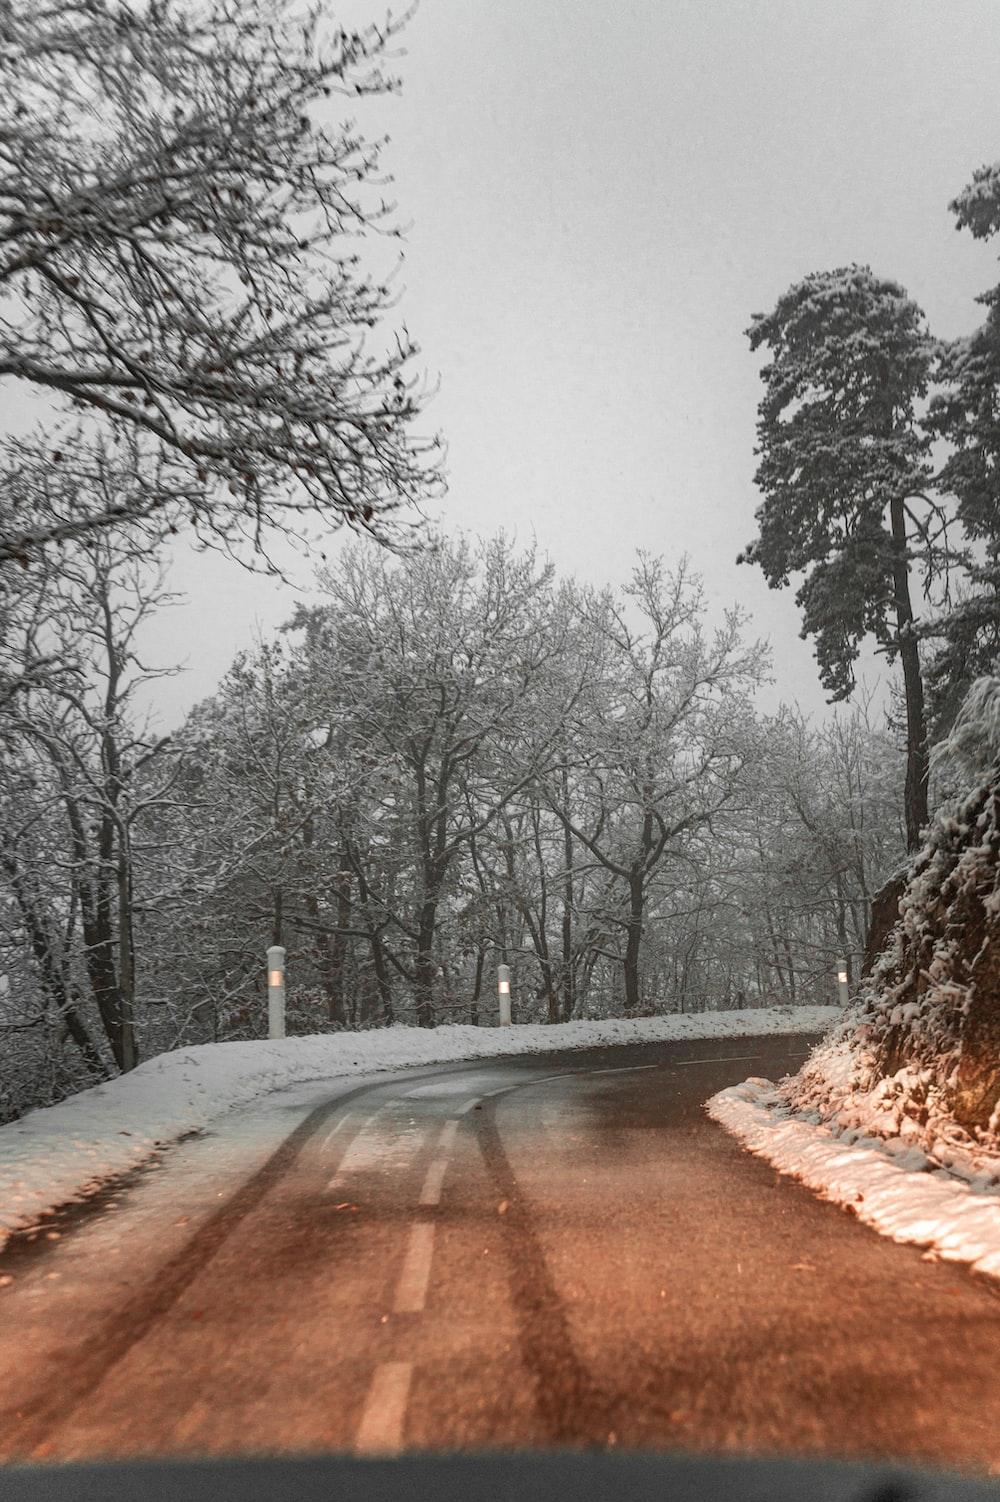 A Snowy Road With Trees On Both Sides Photo Nature Image